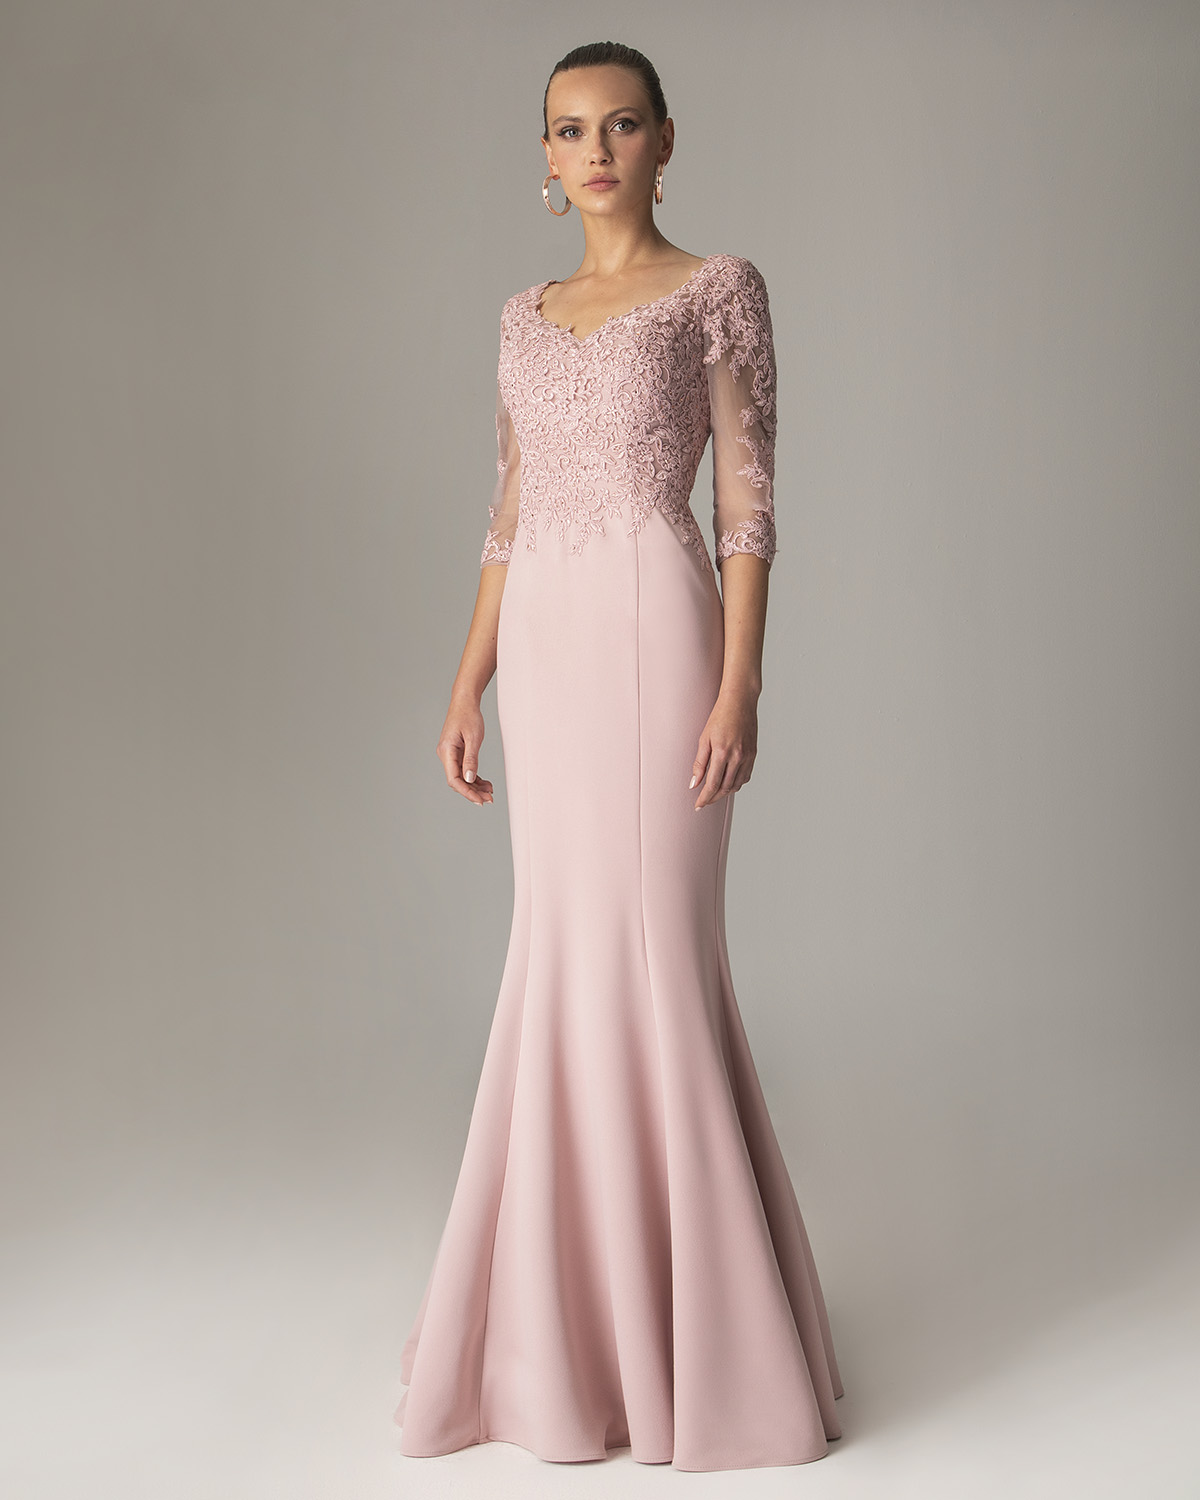 Classic Dresses / Long crepe dress with applique lace top and long sleeves